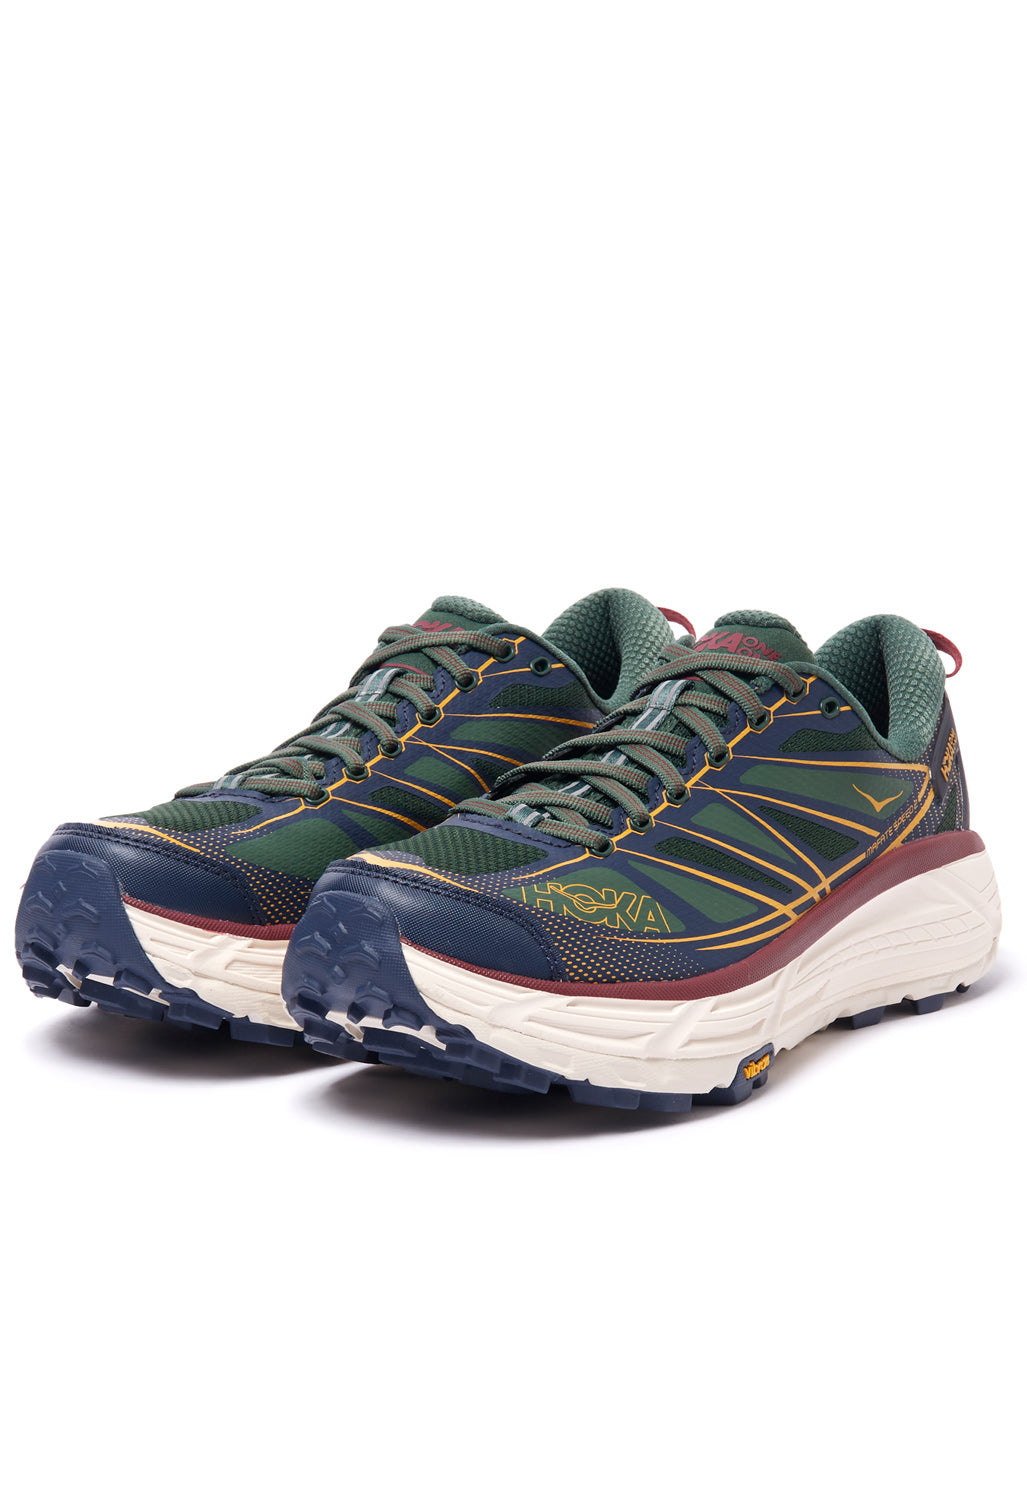 Hoka Unisex Mafate Speed 2 Trainers - Mountain View/Outer Space